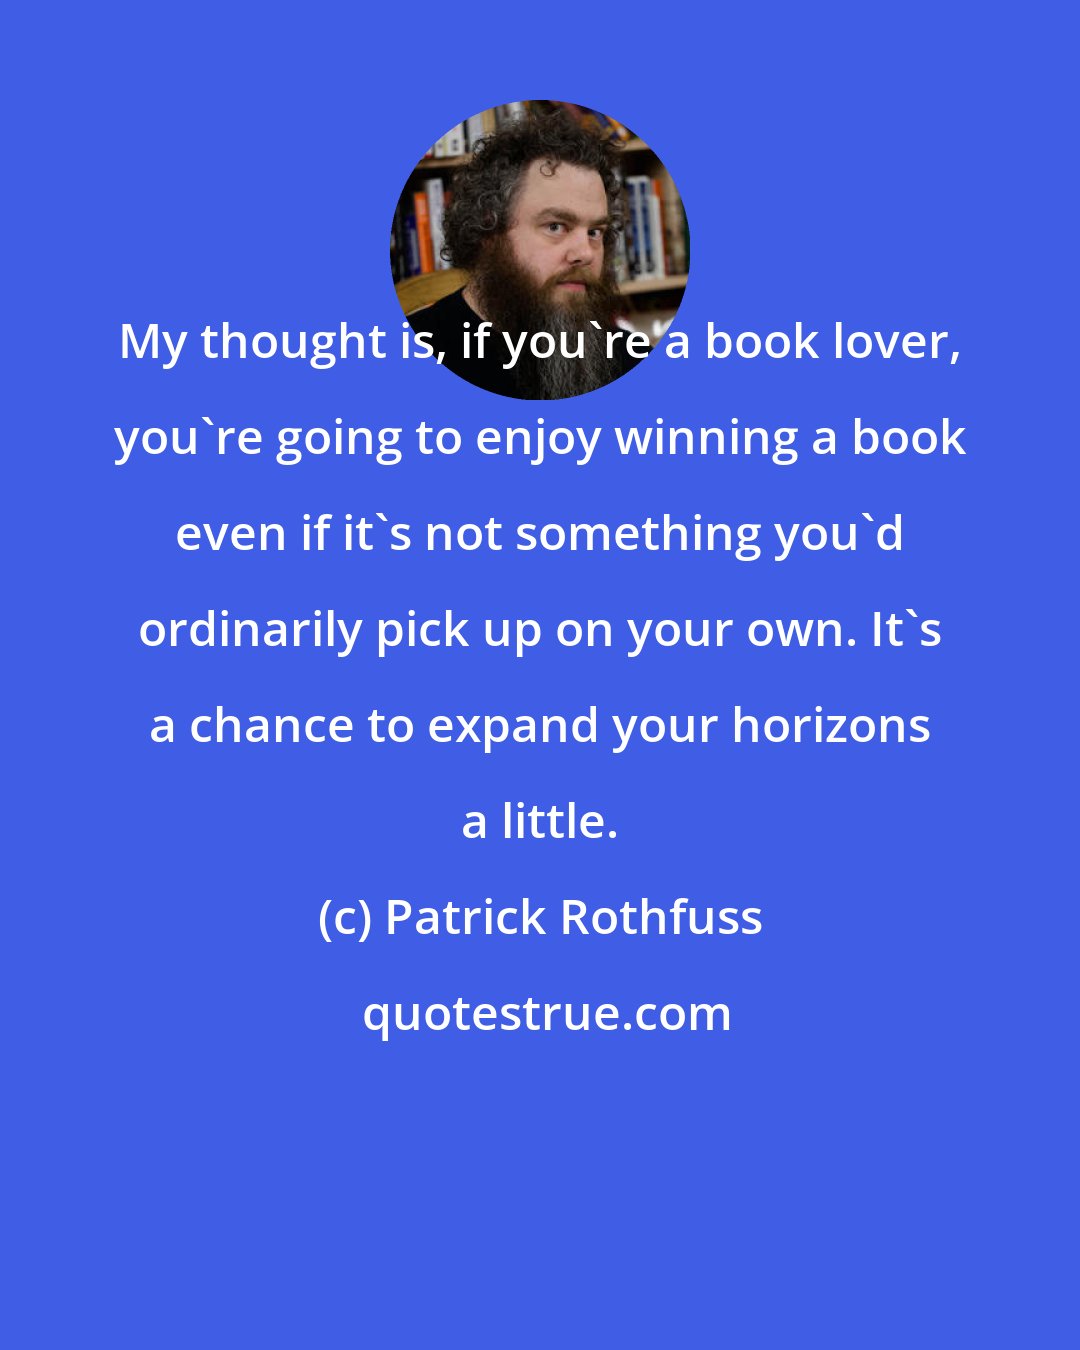 Patrick Rothfuss: My thought is, if you're a book lover, you're going to enjoy winning a book even if it's not something you'd ordinarily pick up on your own. It's a chance to expand your horizons a little.